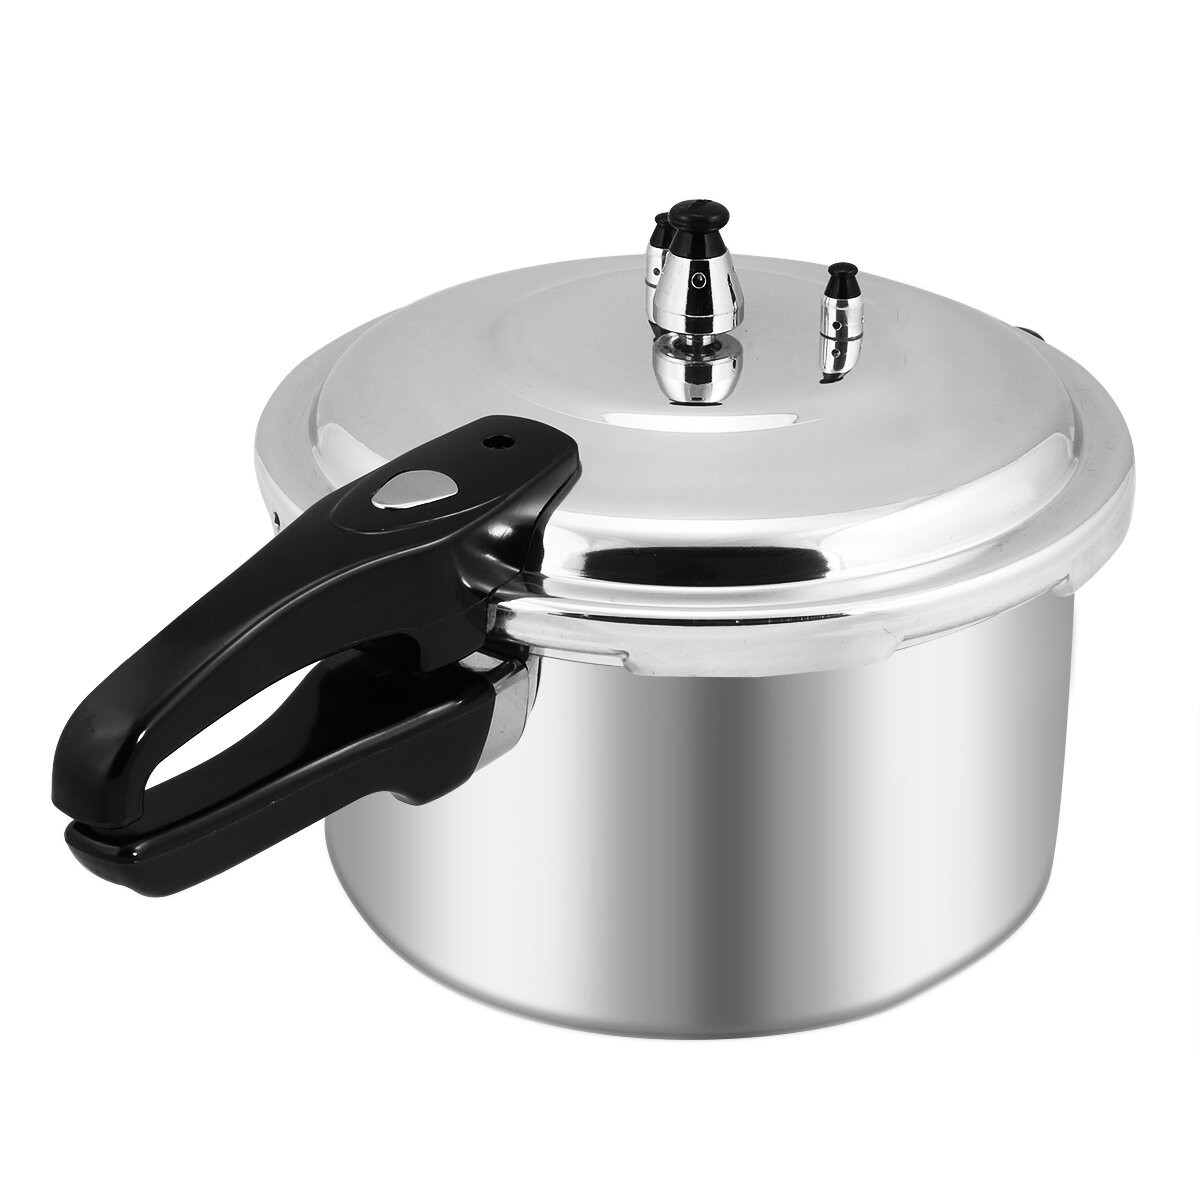 Yuebaaf Stainless Steel Pressure Cooker 8 QT, Suitable for All Cooktops,  Compatible with Gas & Induction Cooker, Faster Cooking with Safely Valve